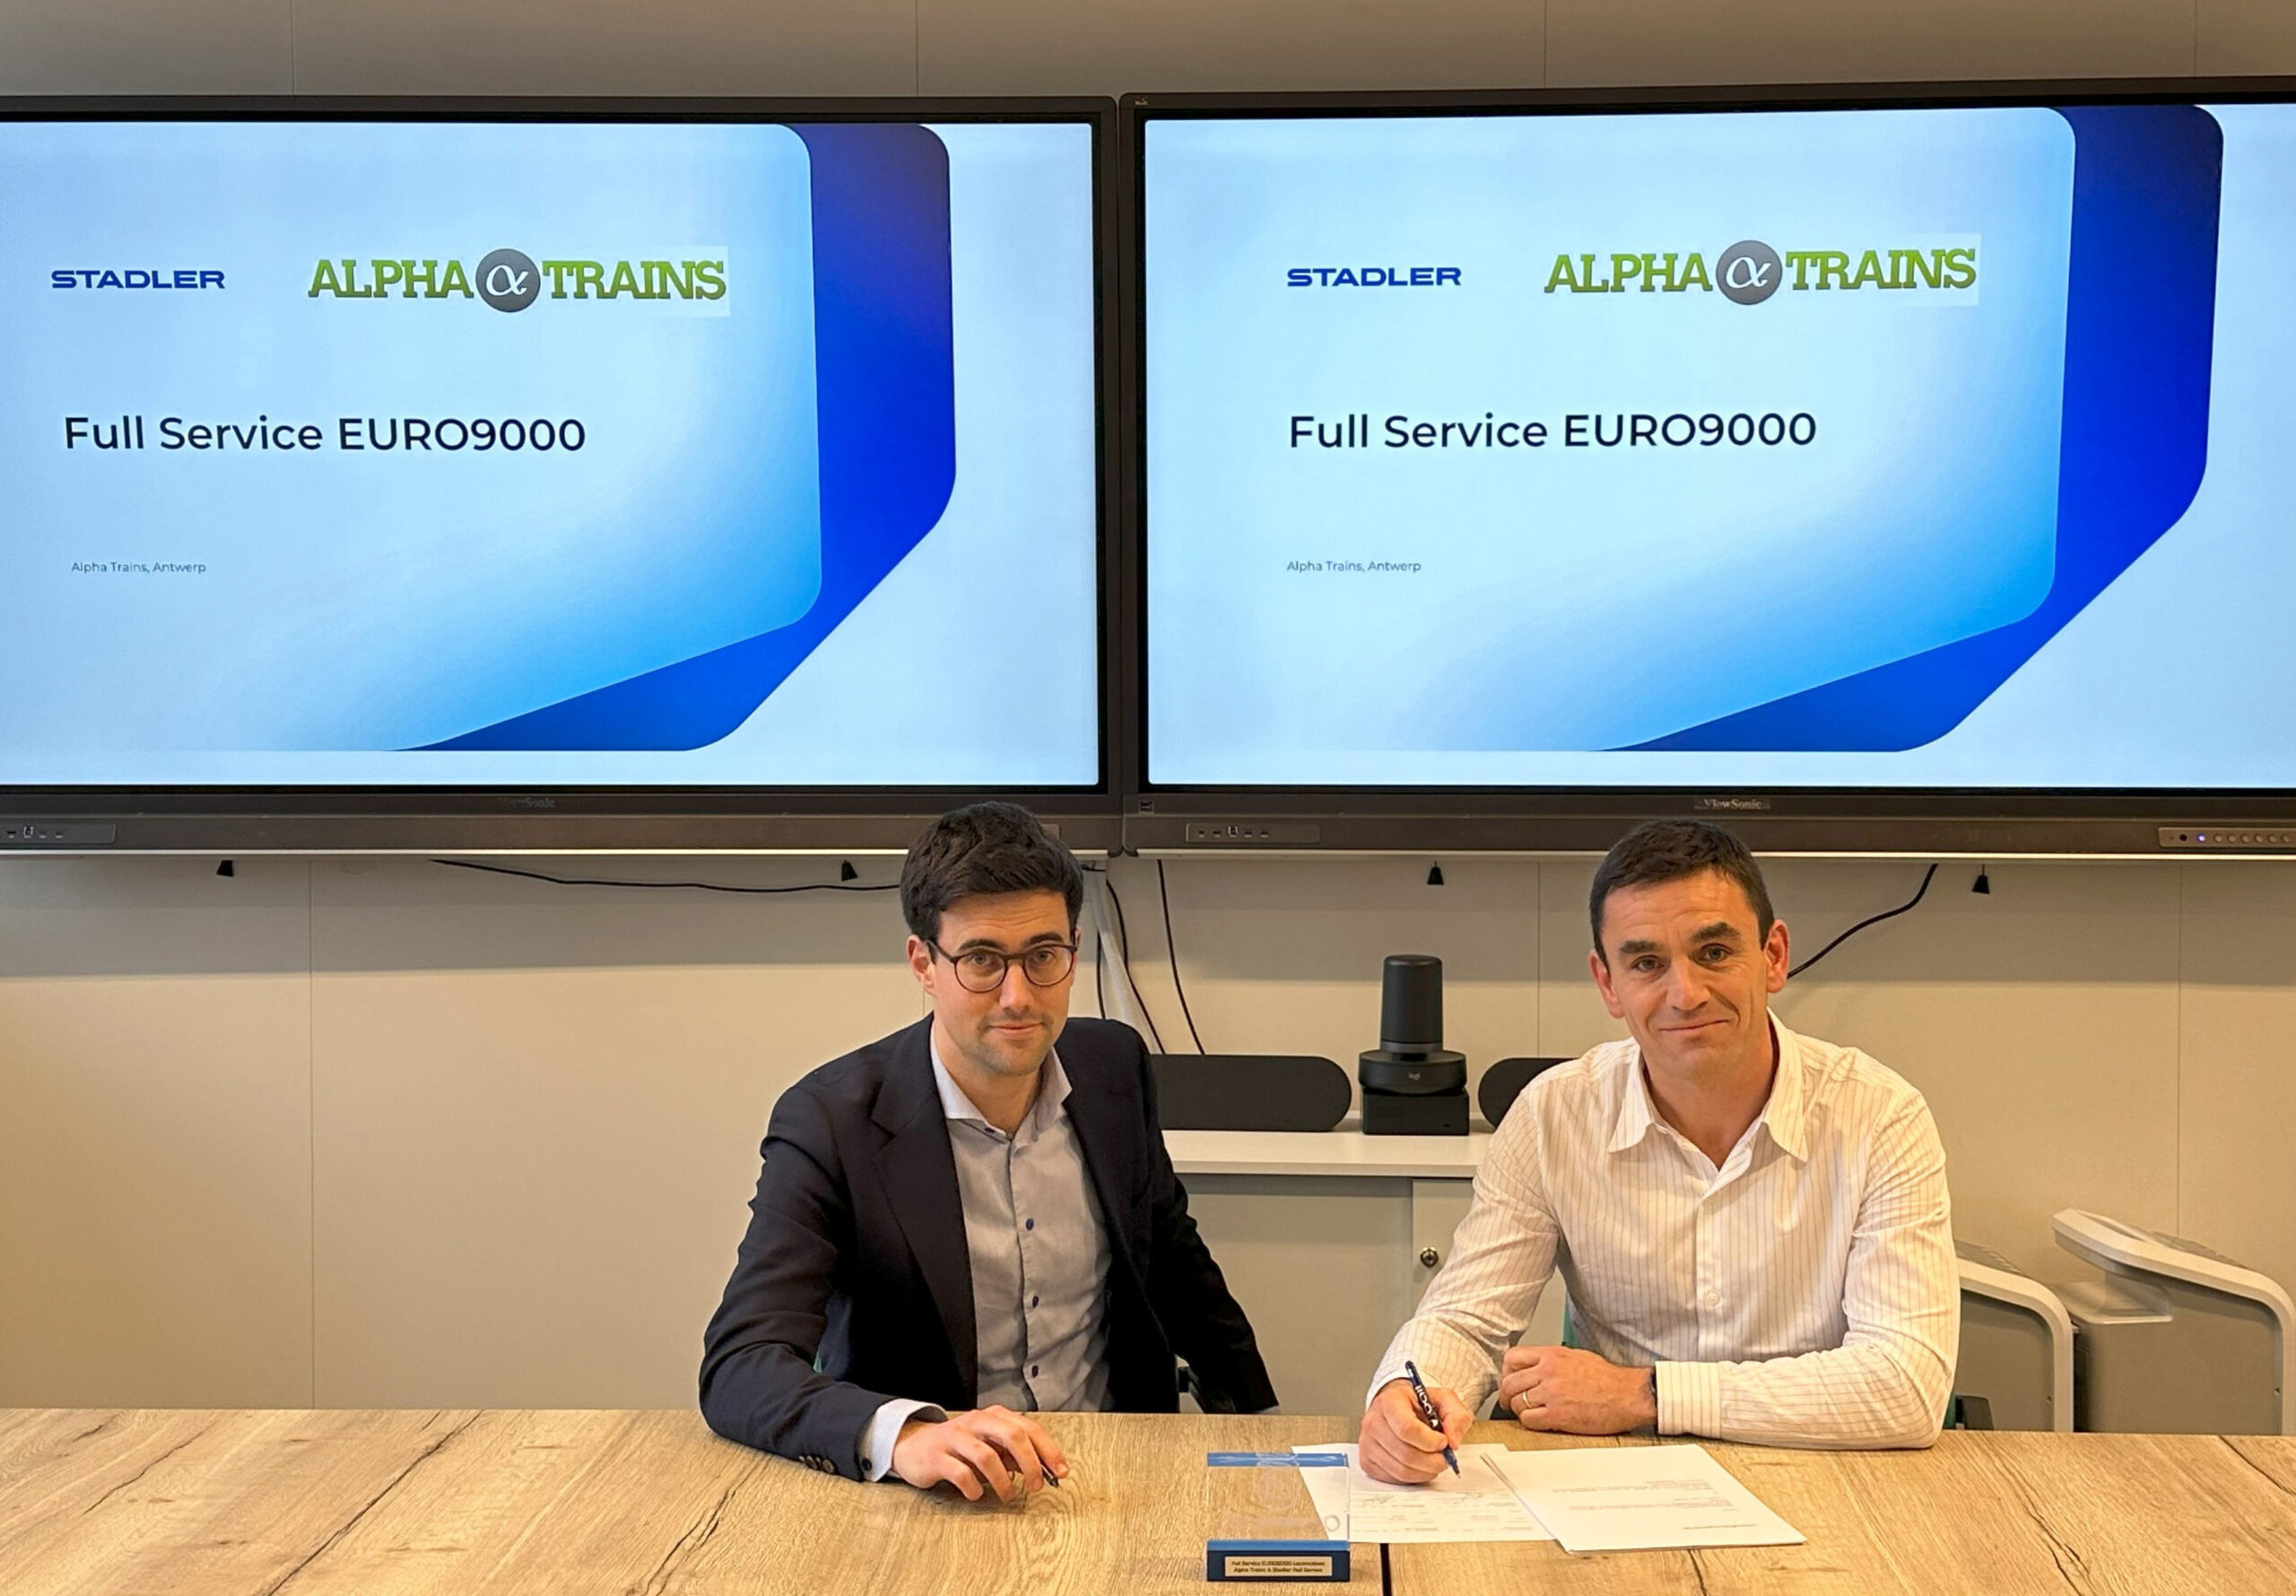 The contract signing between Alpha Trains and Stadler